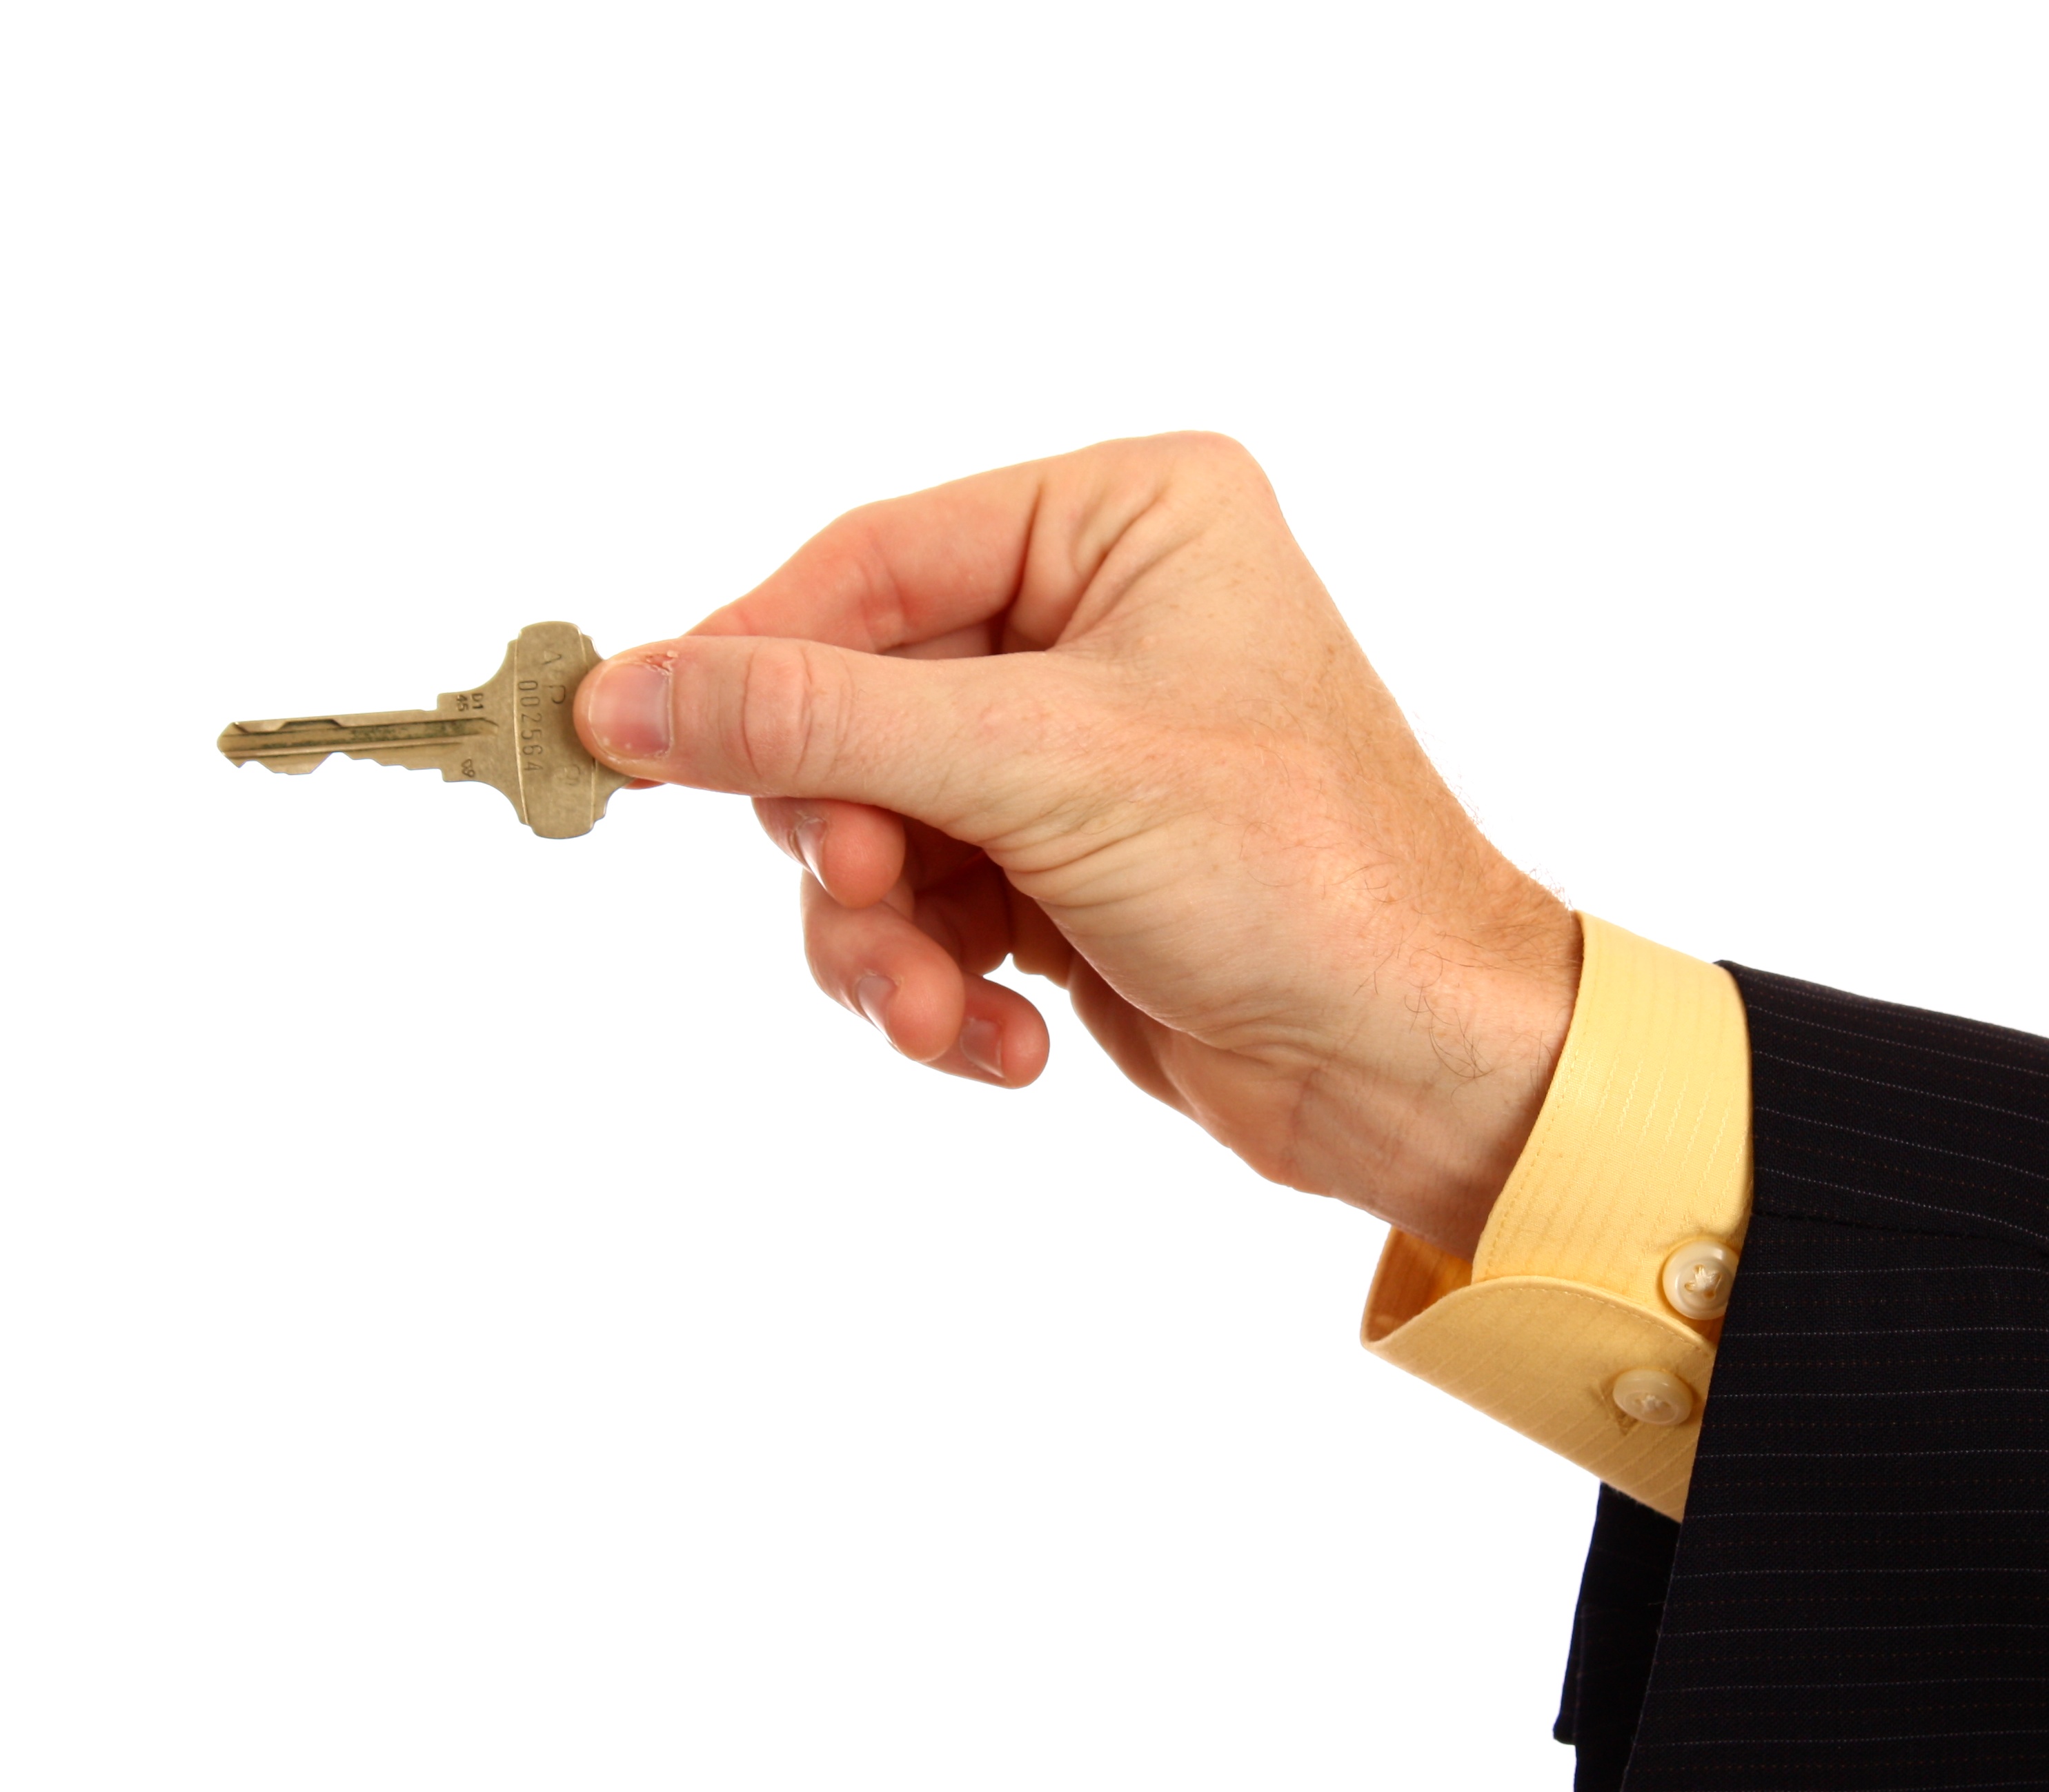 A hand in a business suit holding a key photo